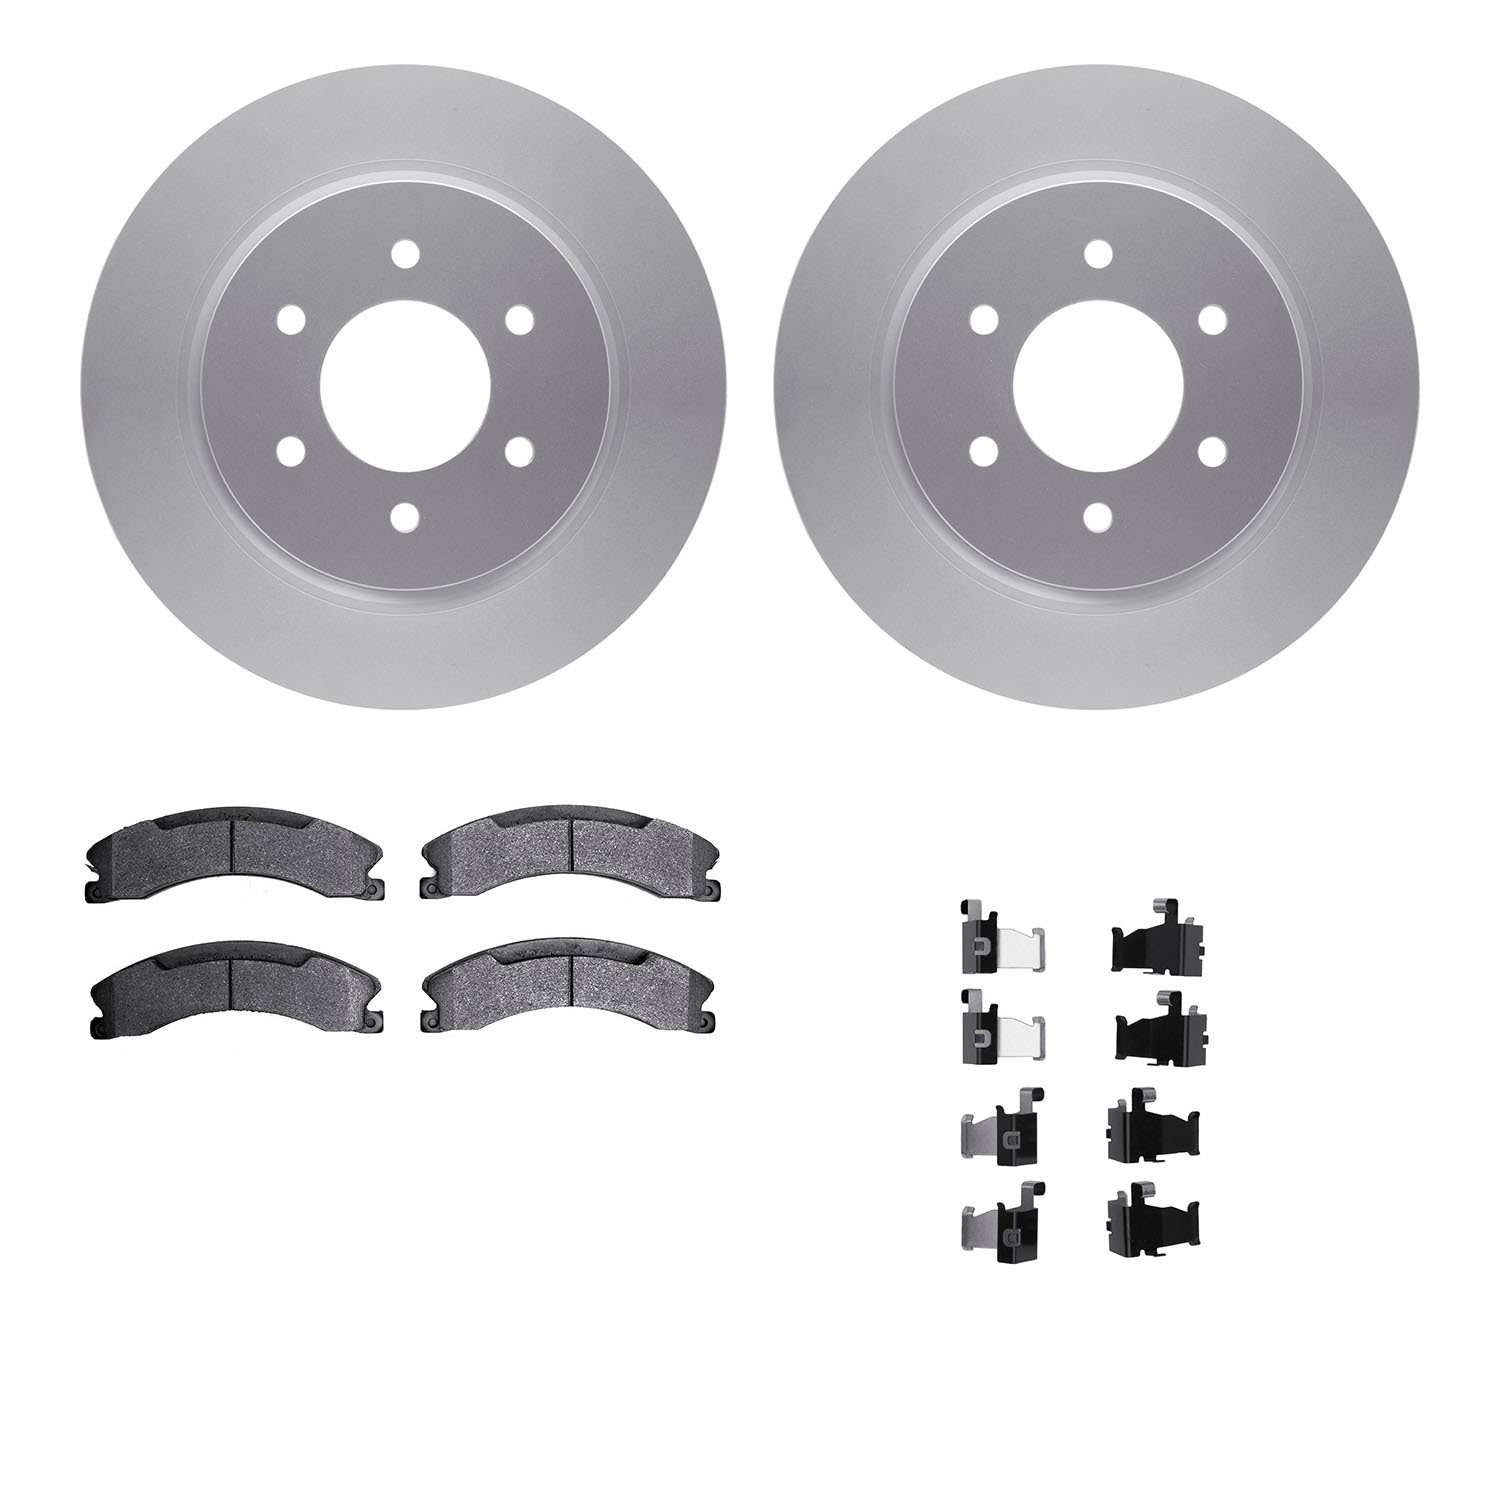 4412-67008 Geospec Brake Rotors with Ultimate-Duty Brake Pads & Hardware, Fits Select Infiniti/Nissan, Position: Front